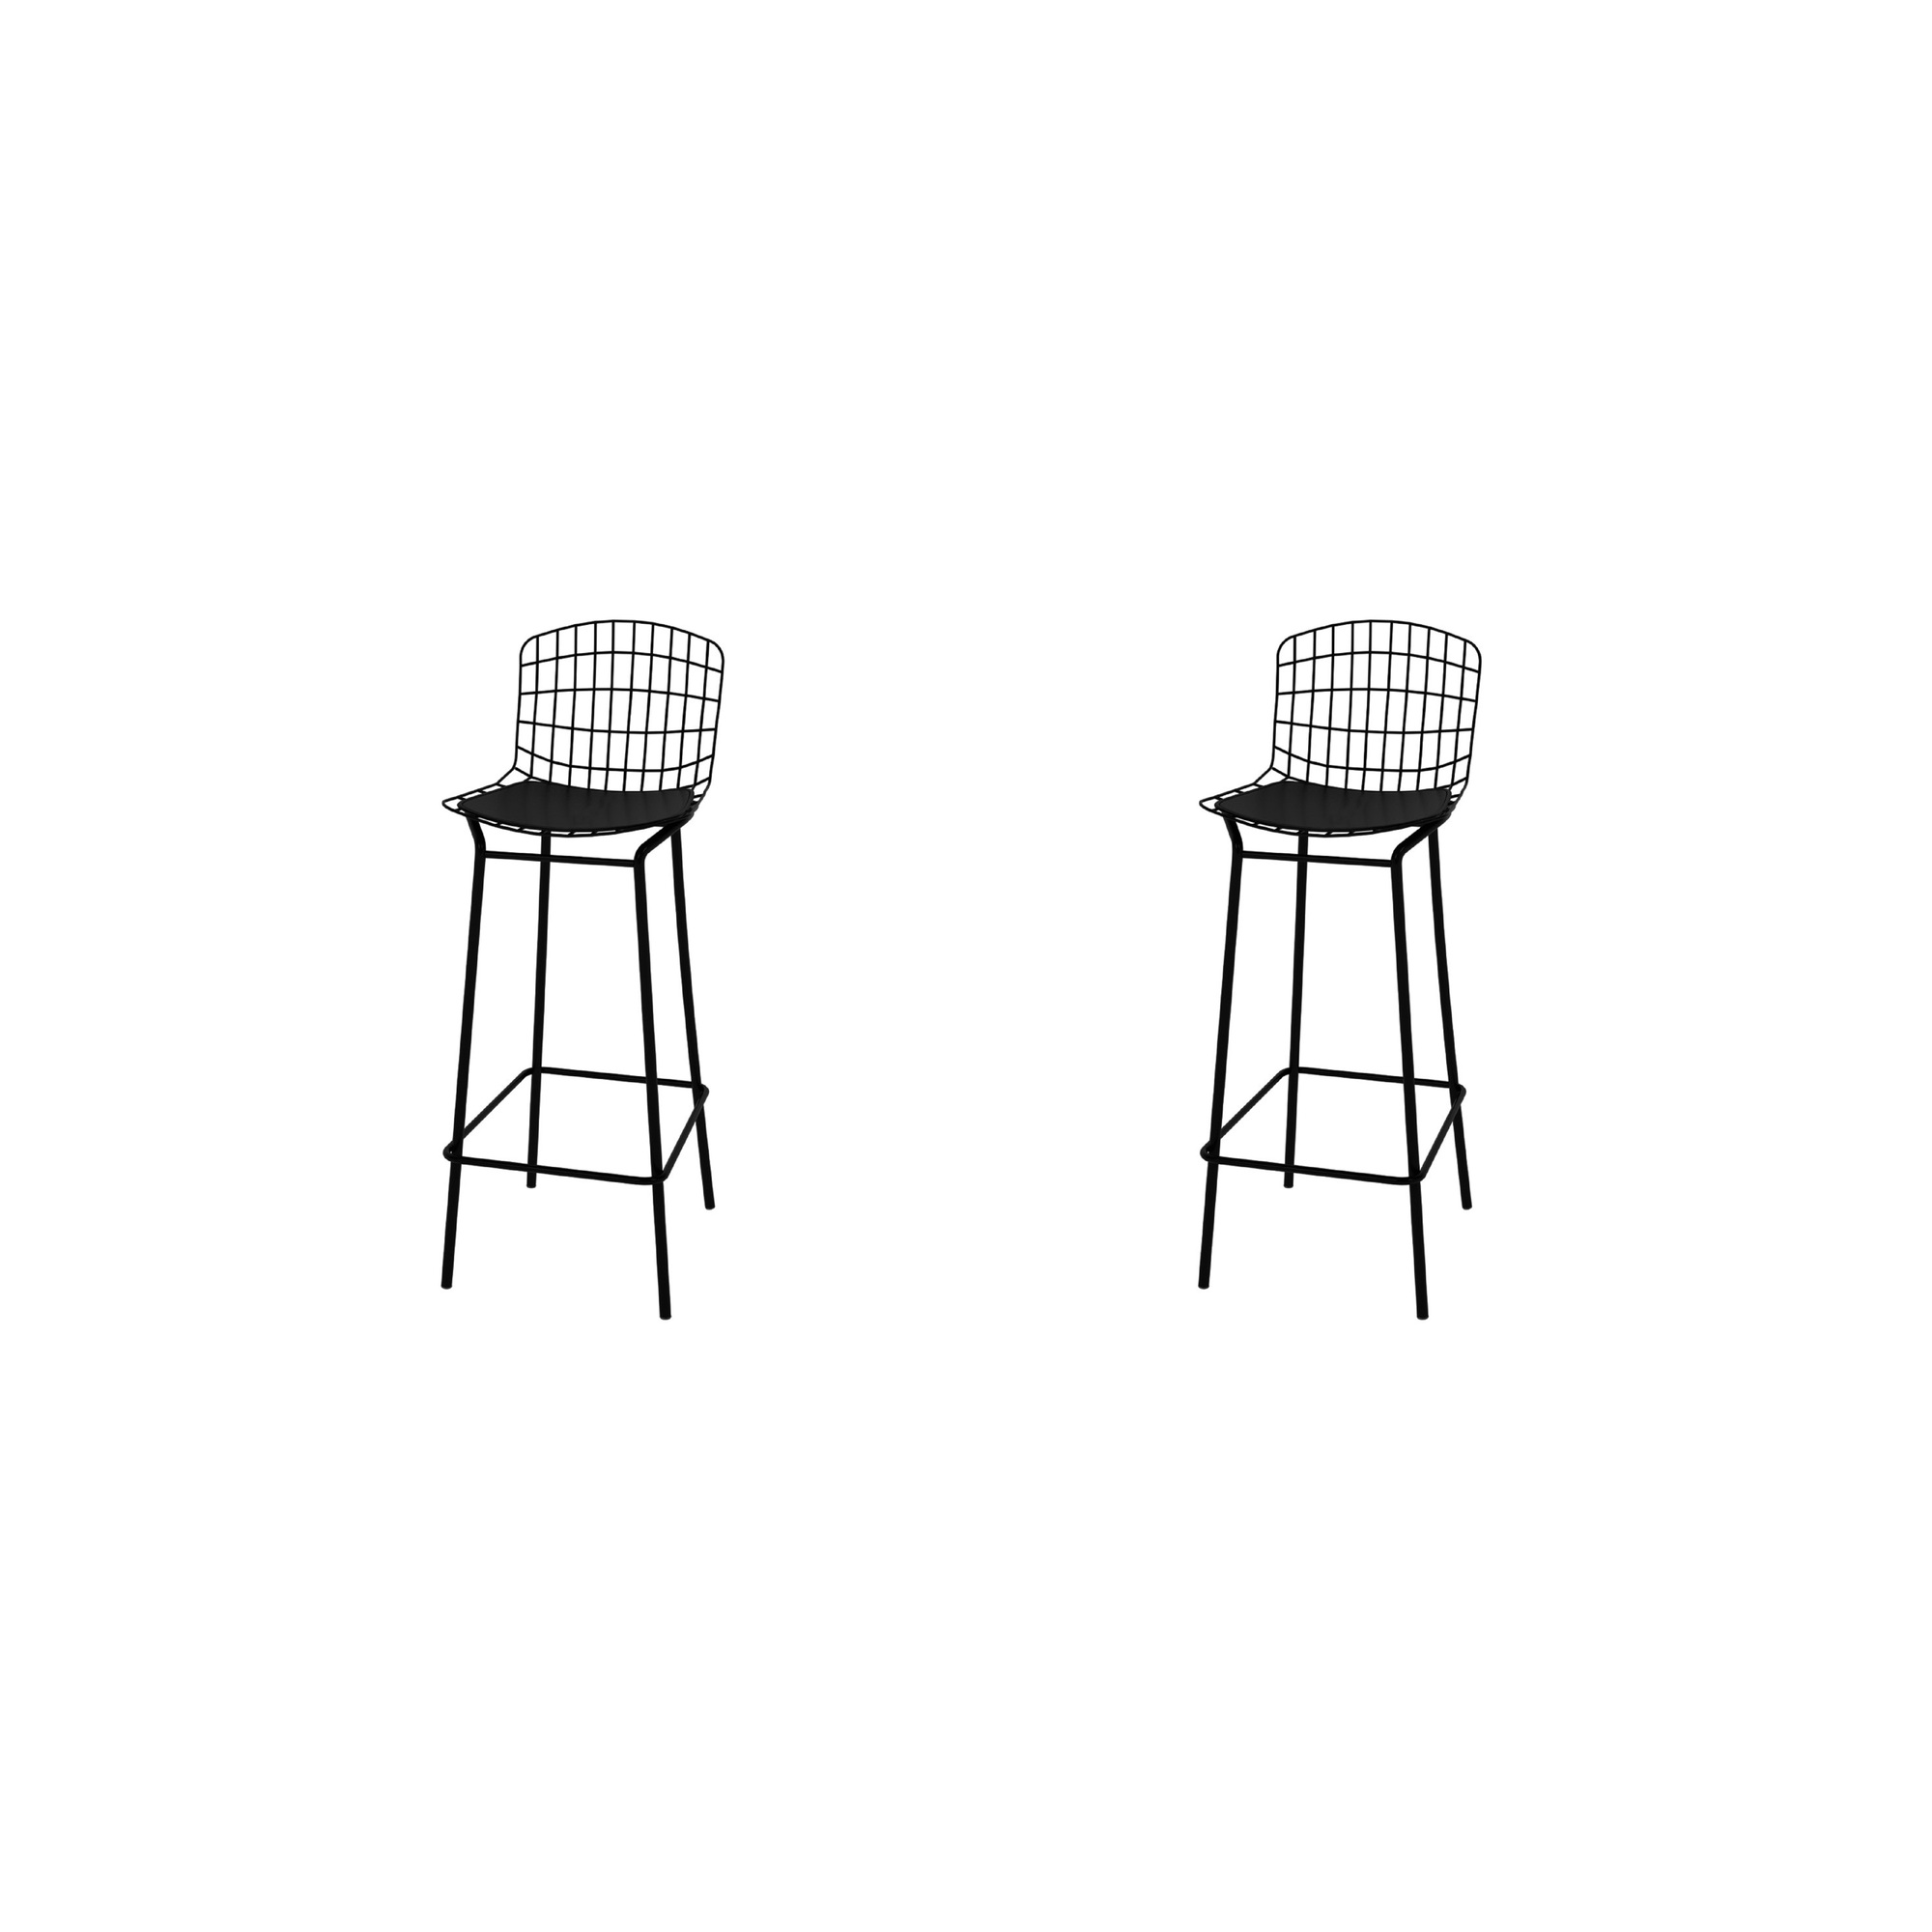 Manhattan Comfort, Madeline 41.73Inch Stool Set of 2 Seat Cushion Black, Primary Color Black, Included (qty.) 2 Model 2-198AMC